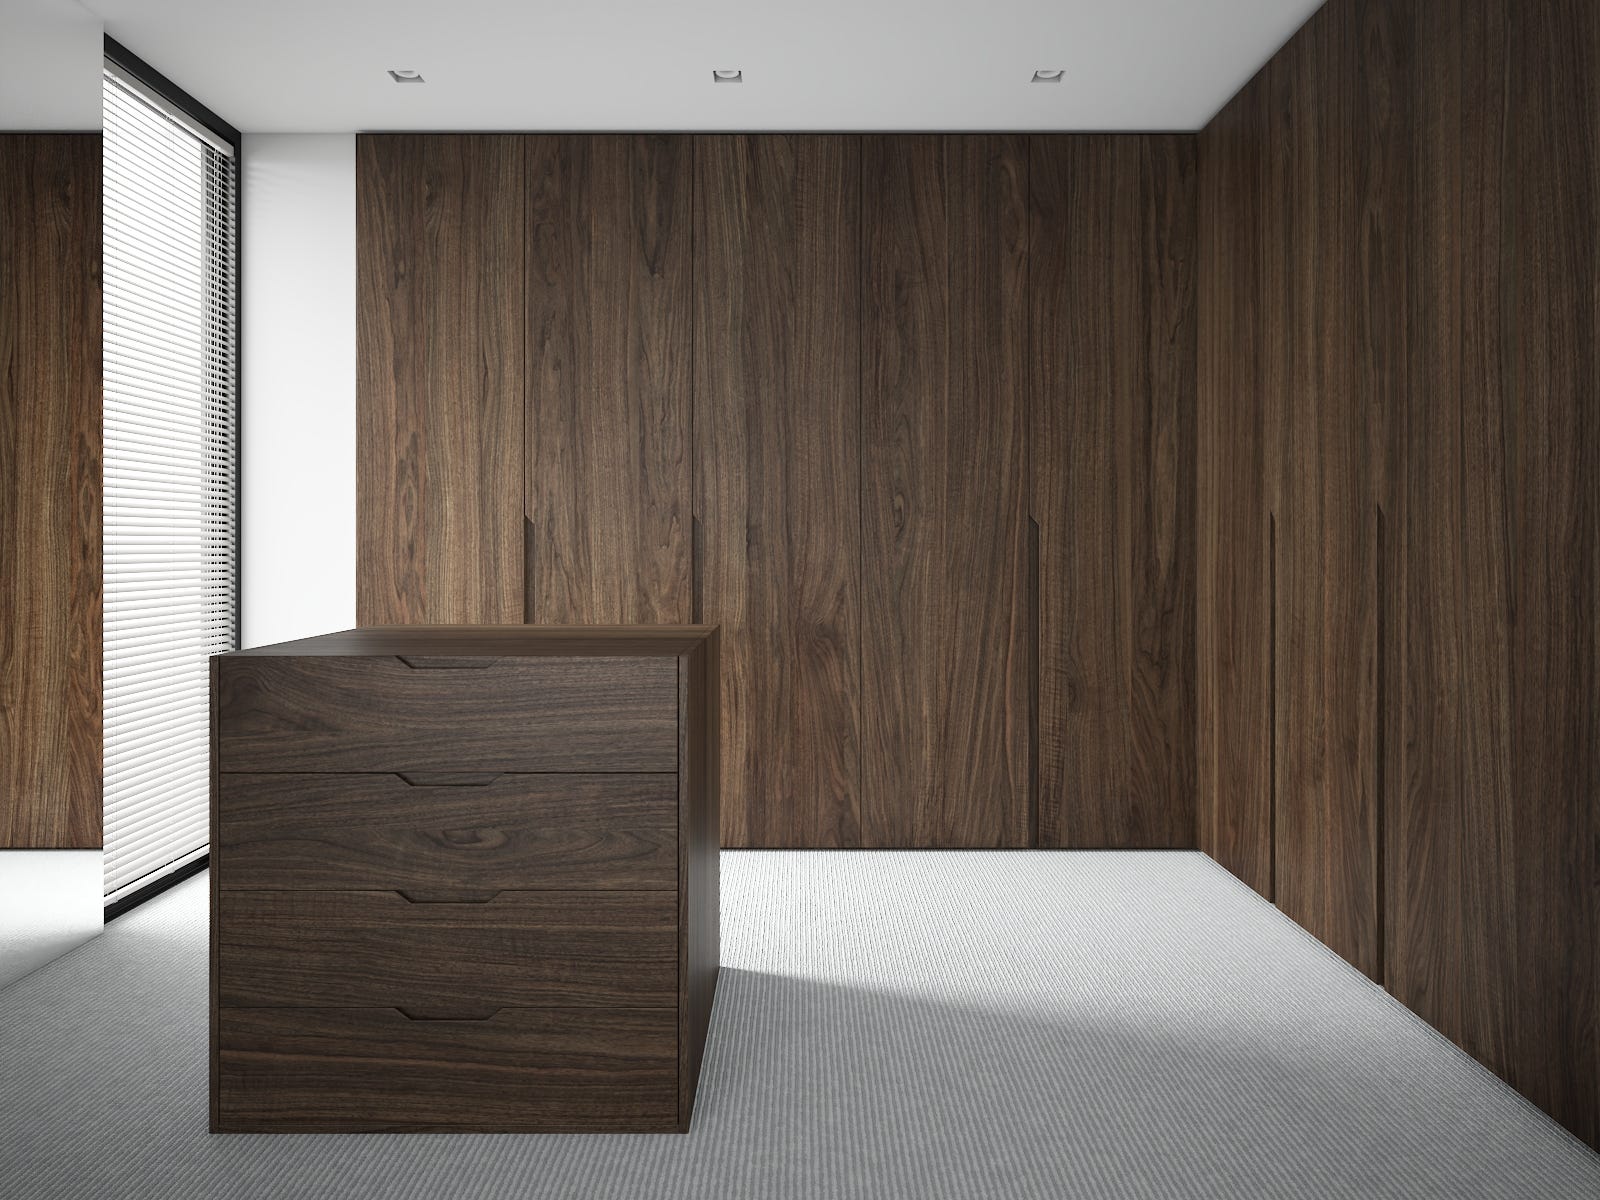 Why Wood Veneer Is One Of The Boldest Design Choices You Can Make